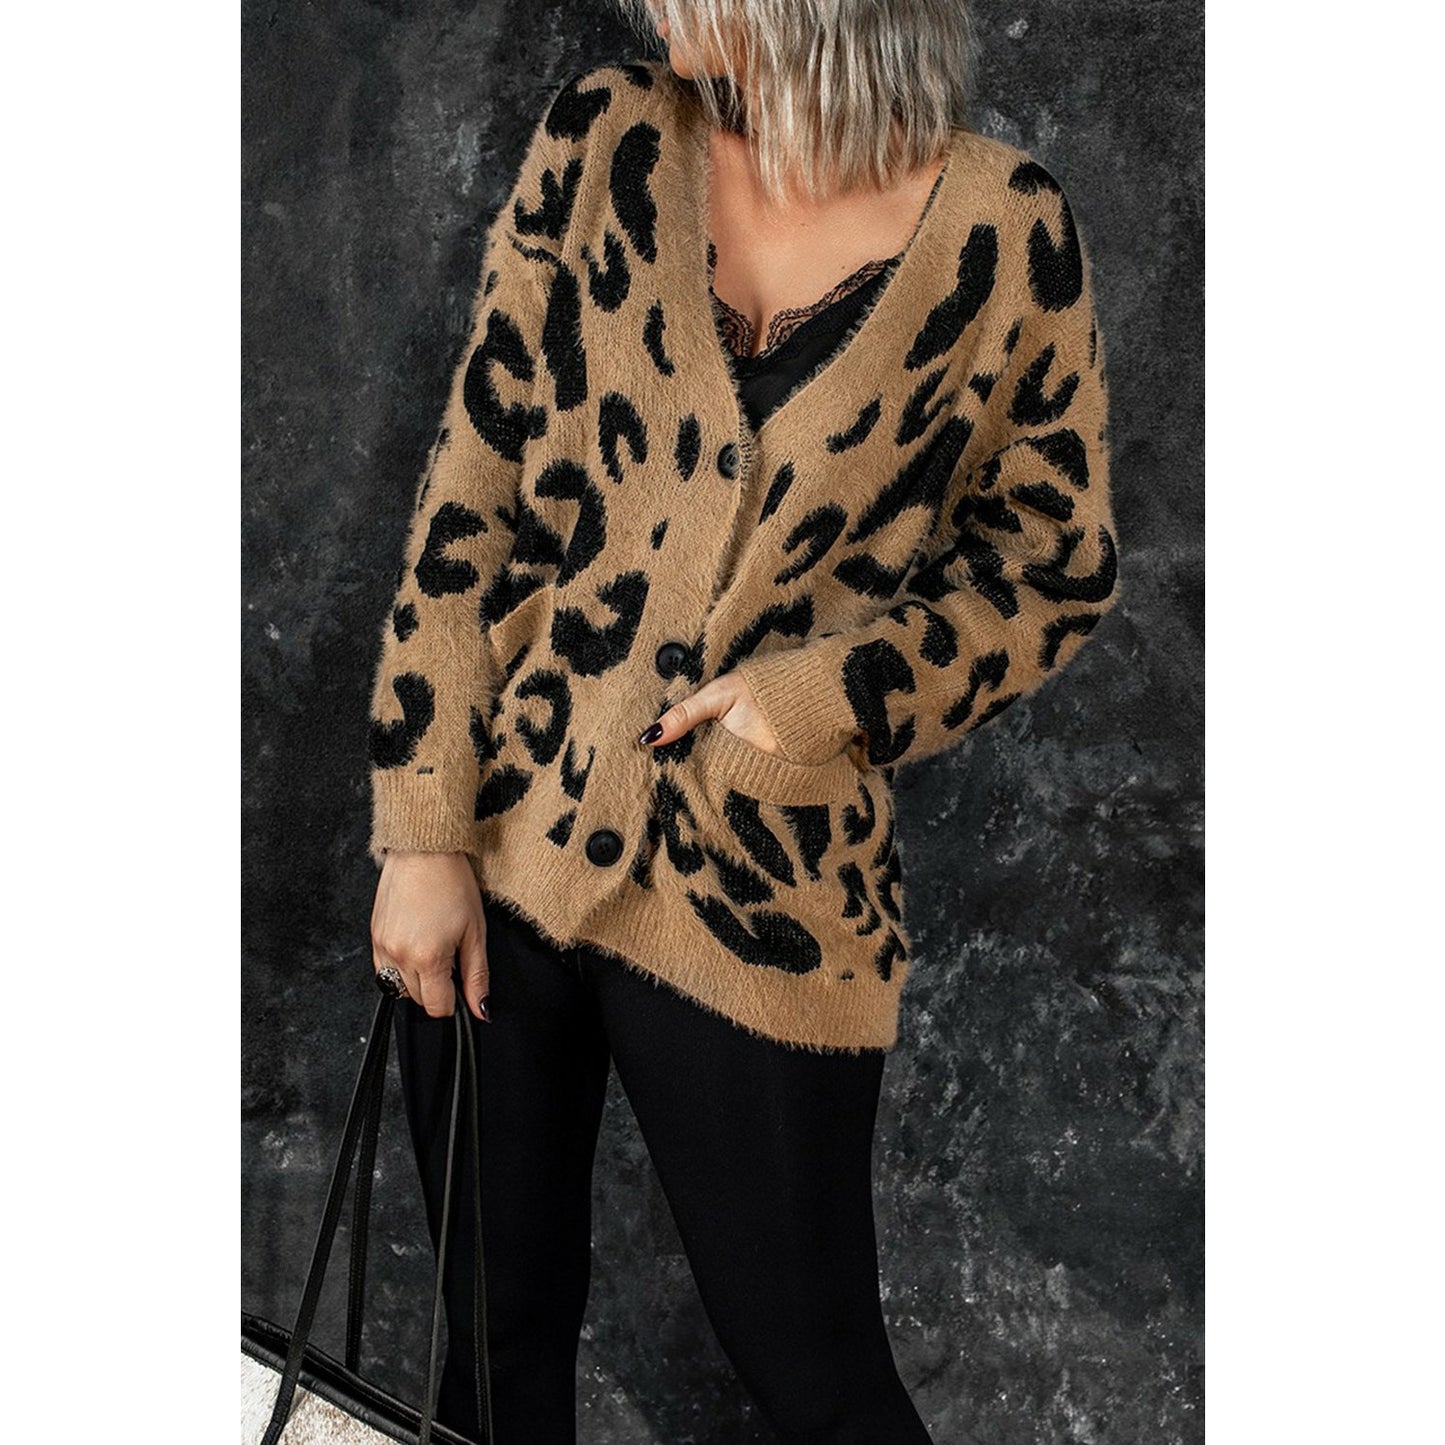 Leopard V Neck Buttons Sweater Cardigan with Pockets